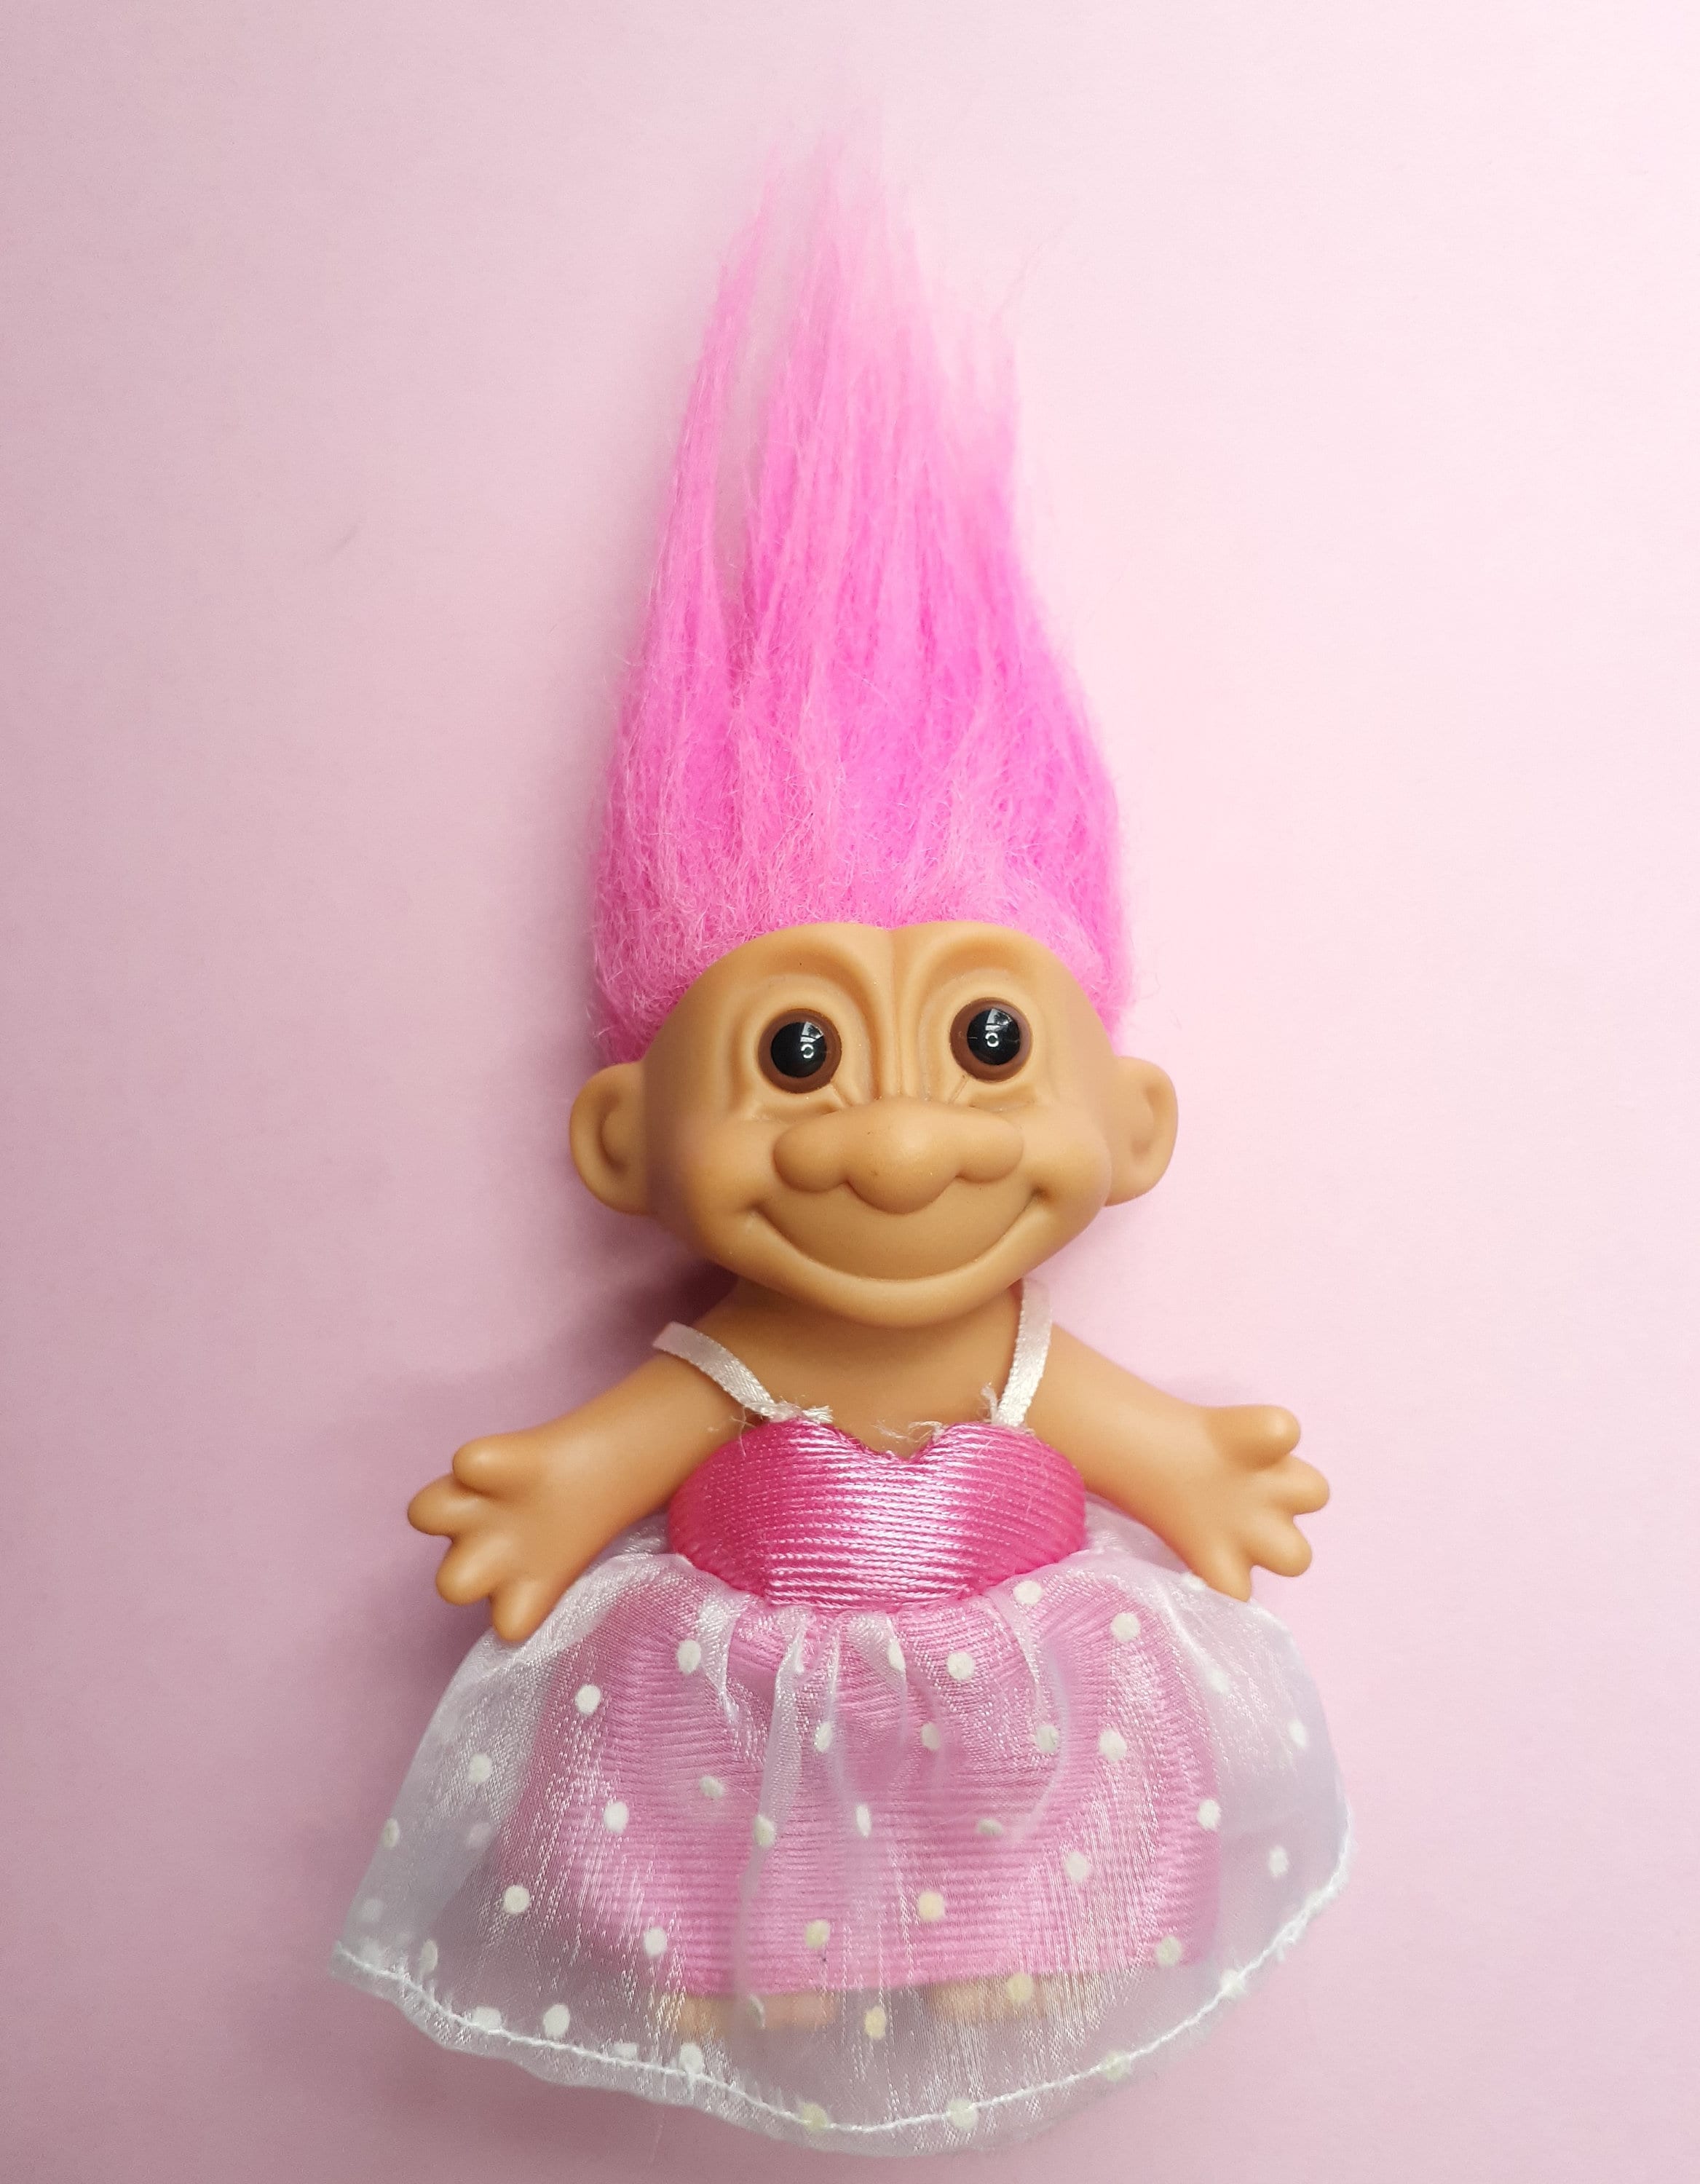 10x Troll Dolls Lucky Doll Action Figure Party Favor Toy Collectable Dolls